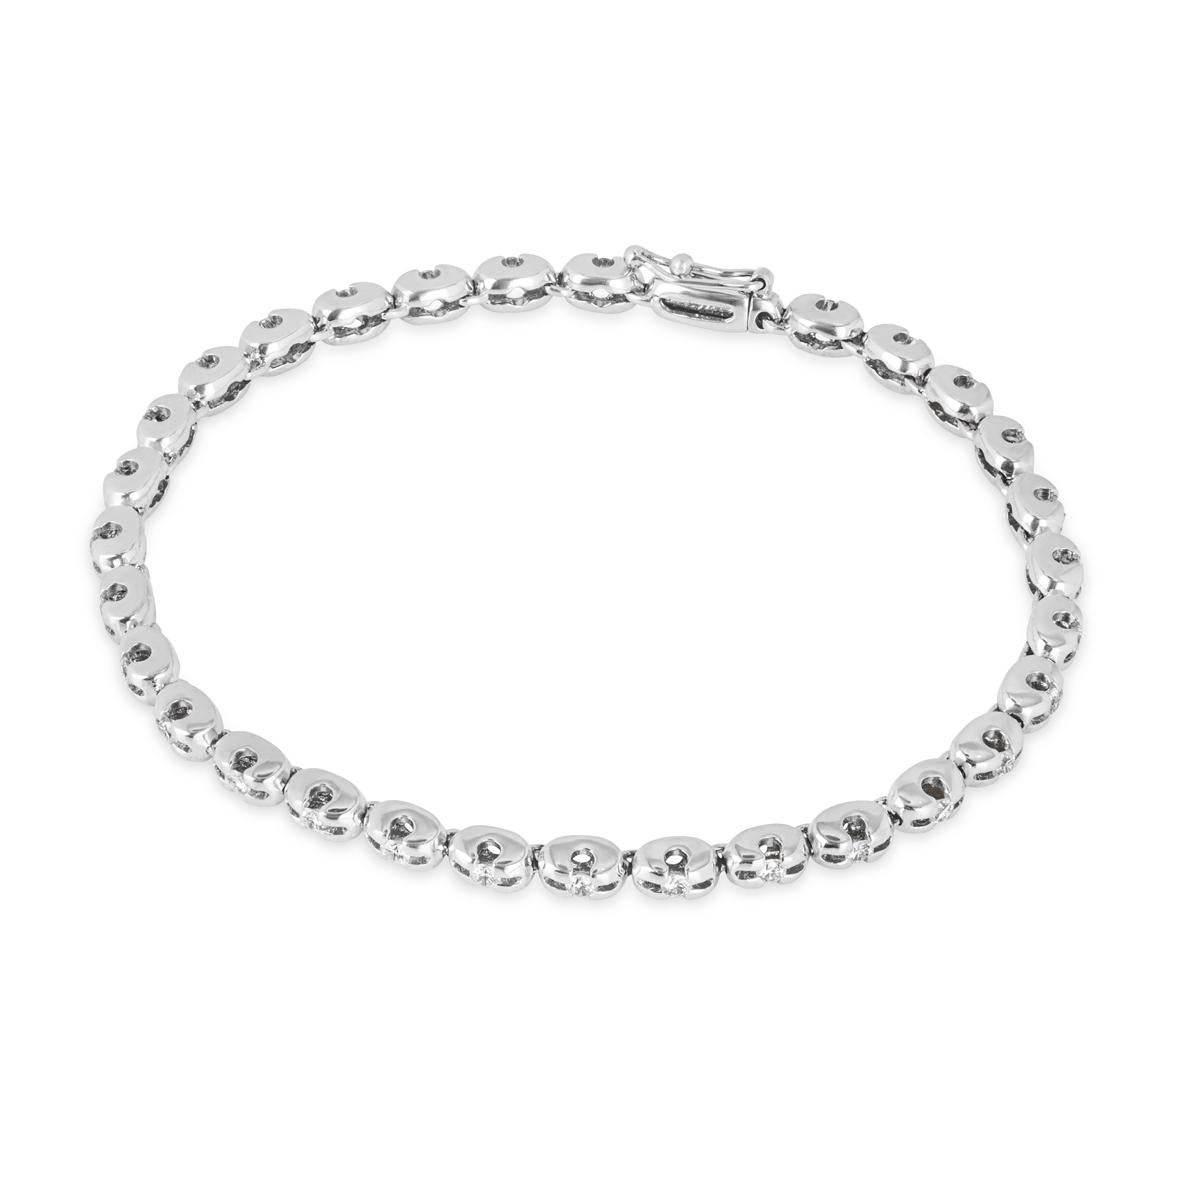 A beautiful 18k white gold diamond line bracelet. The bracelet features 30 round brilliant cut diamonds tension set in an openwork link setting with an approximate weight of 0.90ct, F-H colour and VS clarity. The 7-inch link bracelet finishes with a